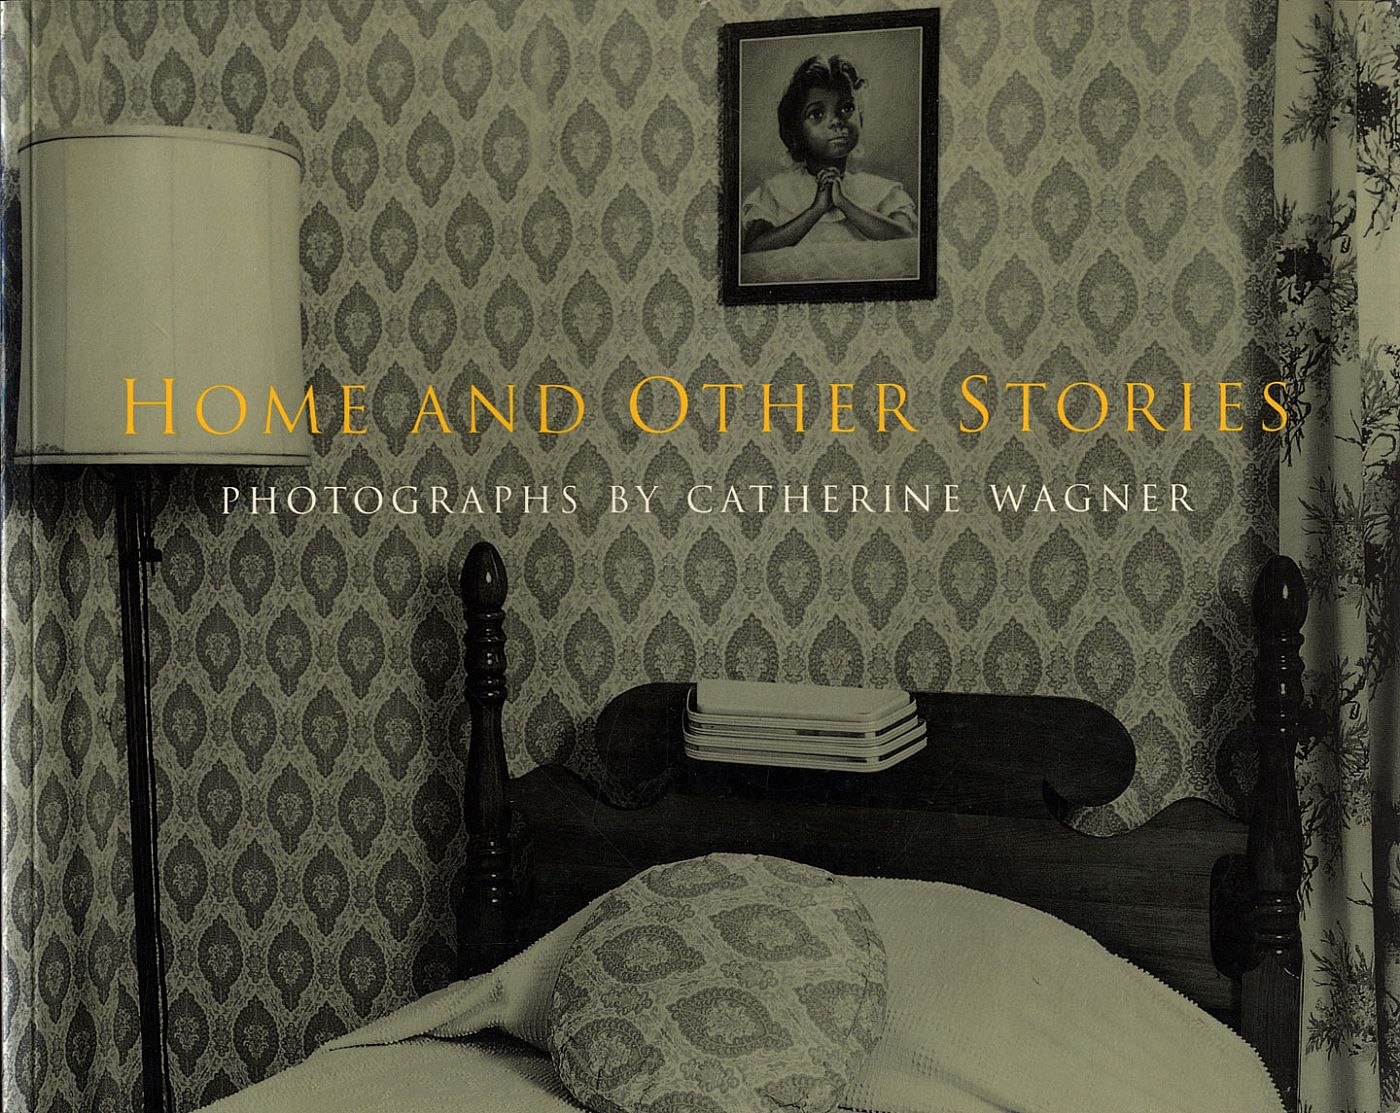 Home and Other Stories: Photographs by Catherine Wagner (Soft Cover First Edition)